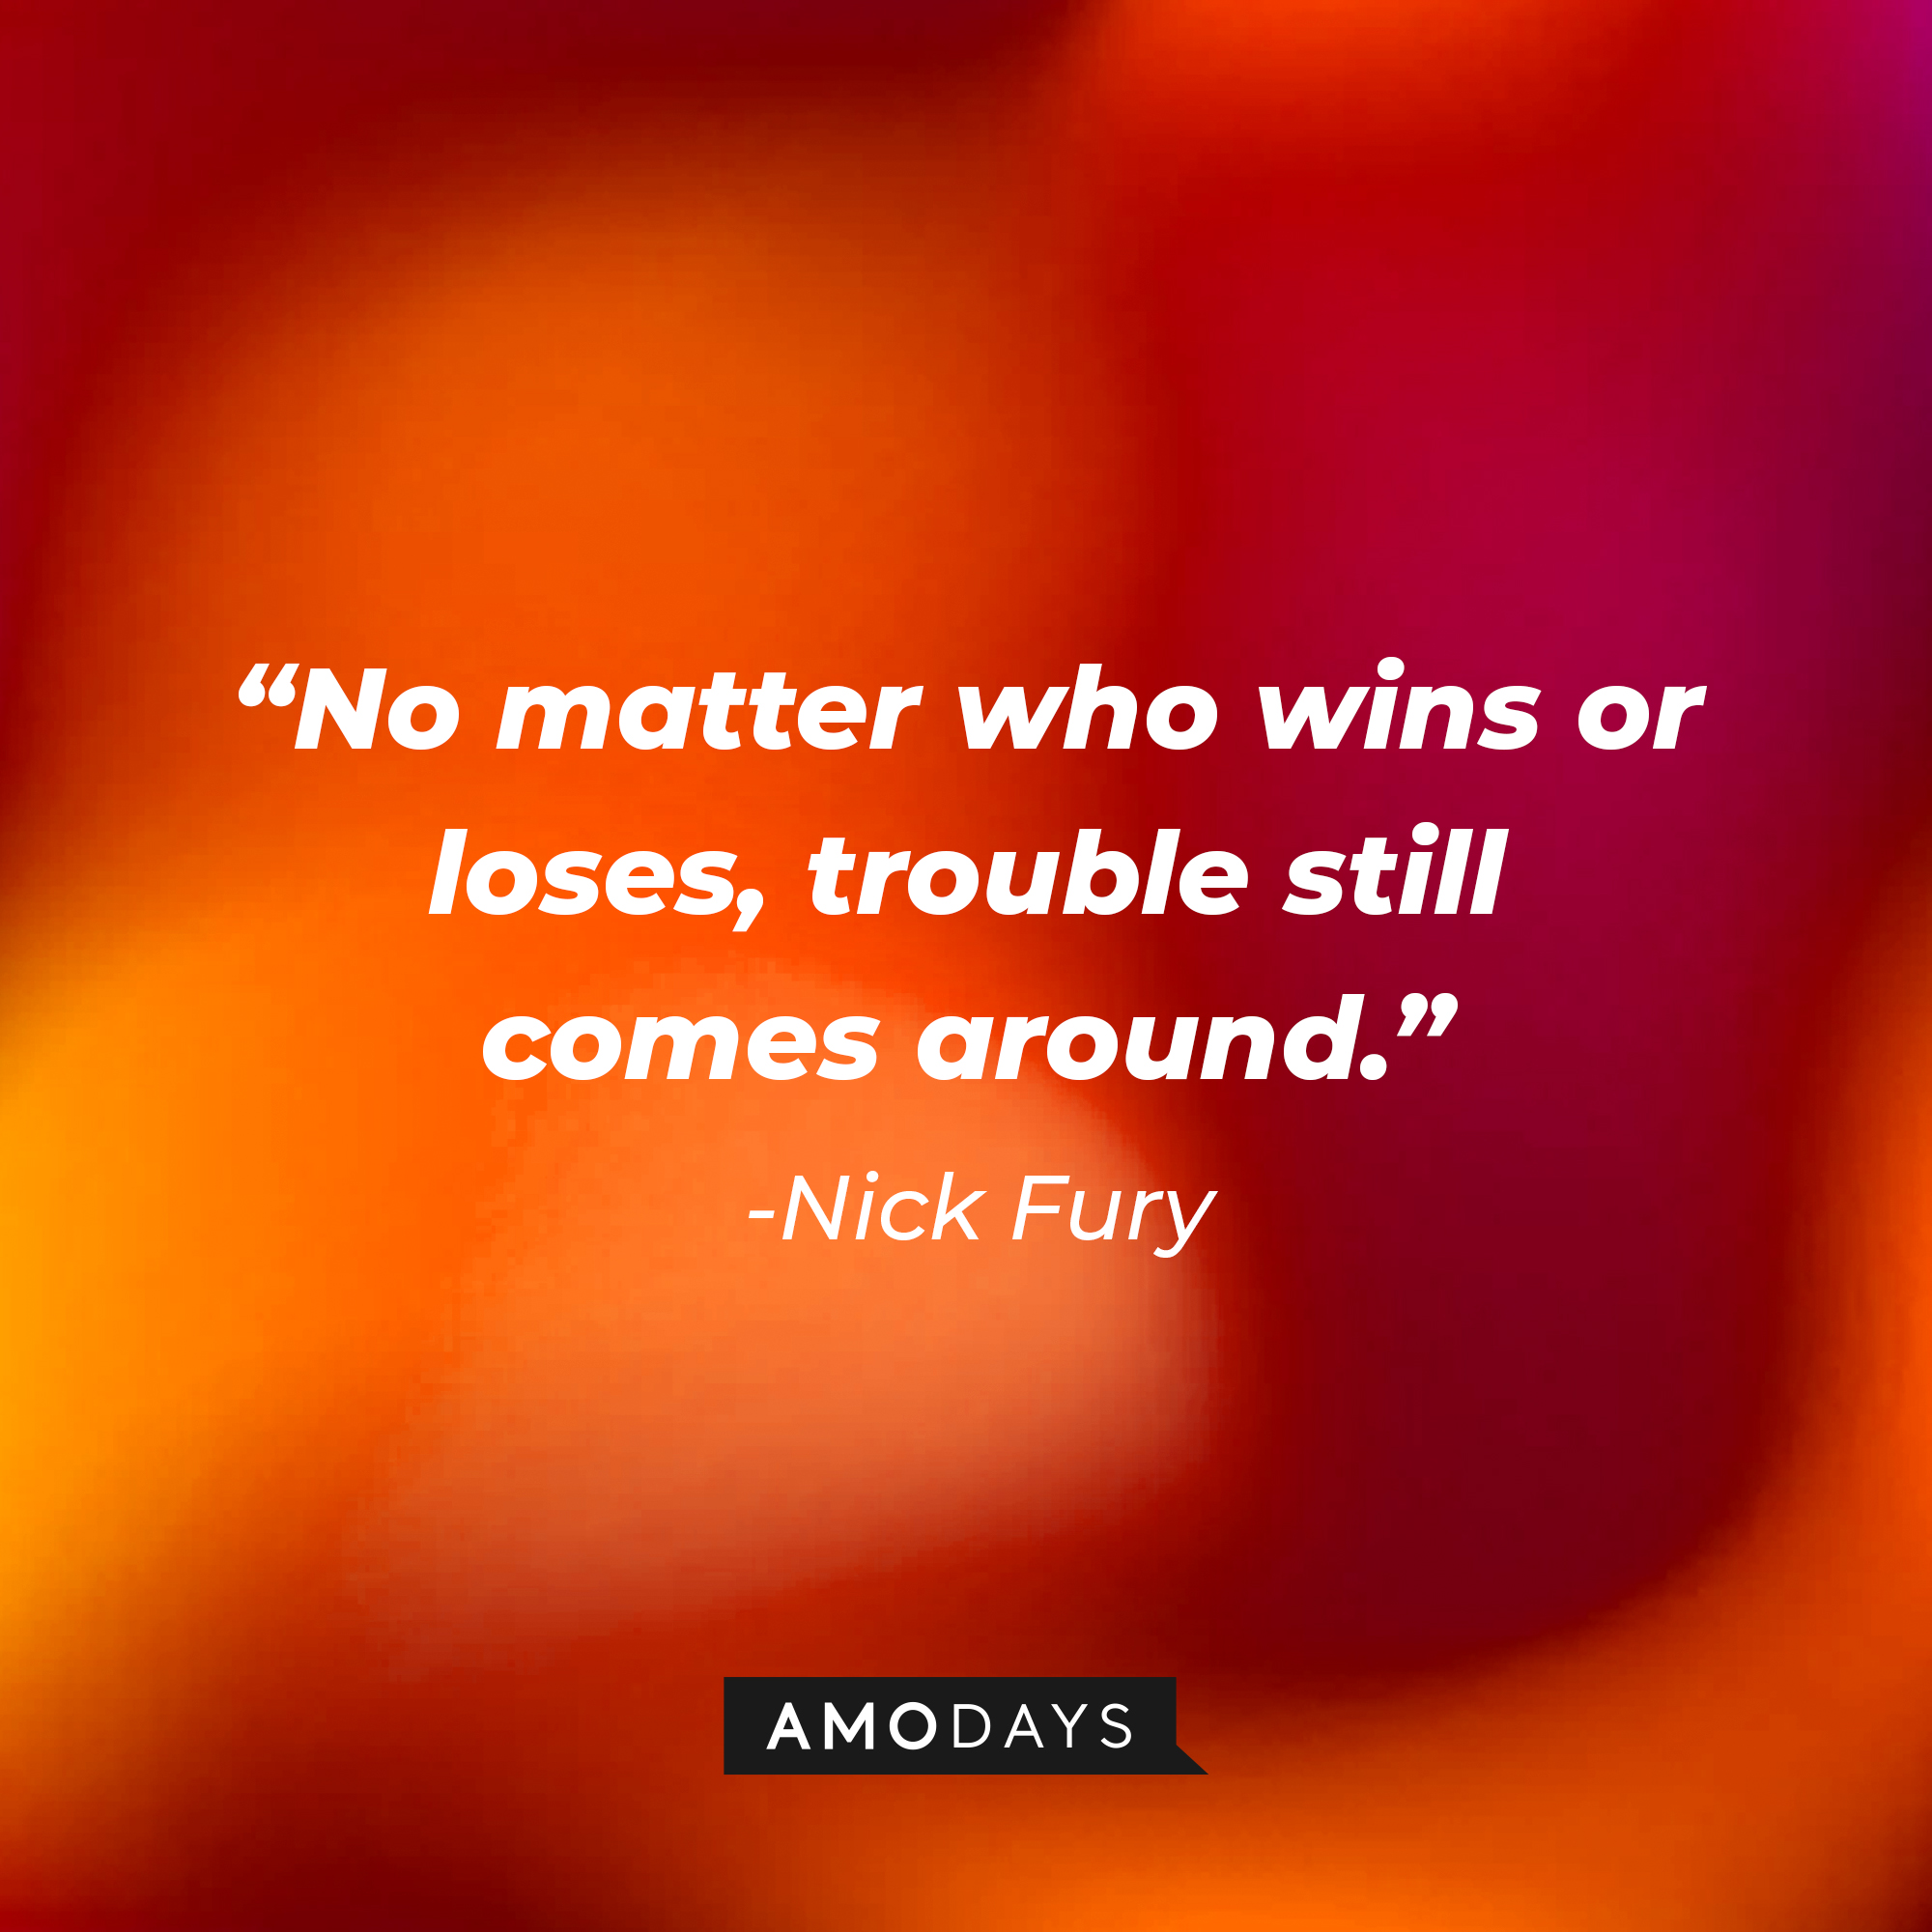 Nick Fury's quote: "No matter who wins or loses, trouble still comes around." | Source: AmoDays